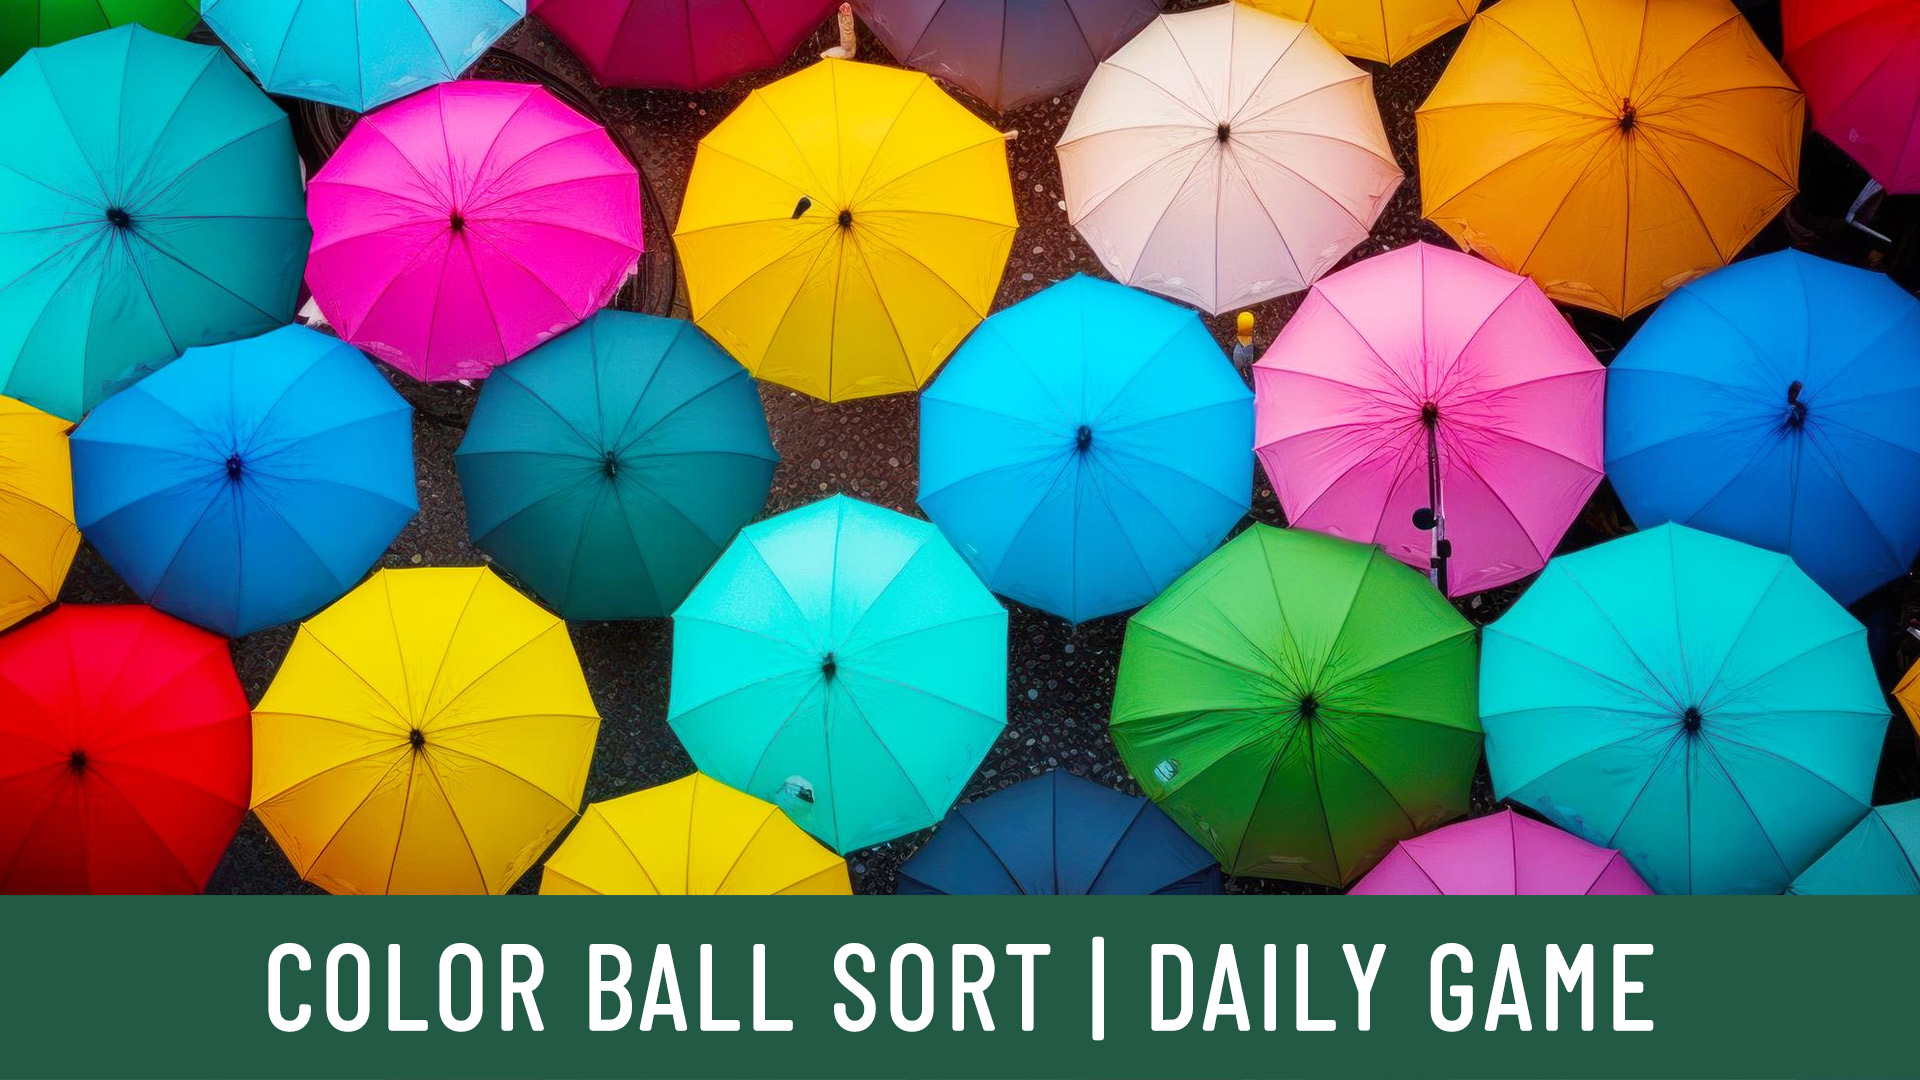 Daily Color Ball Sort